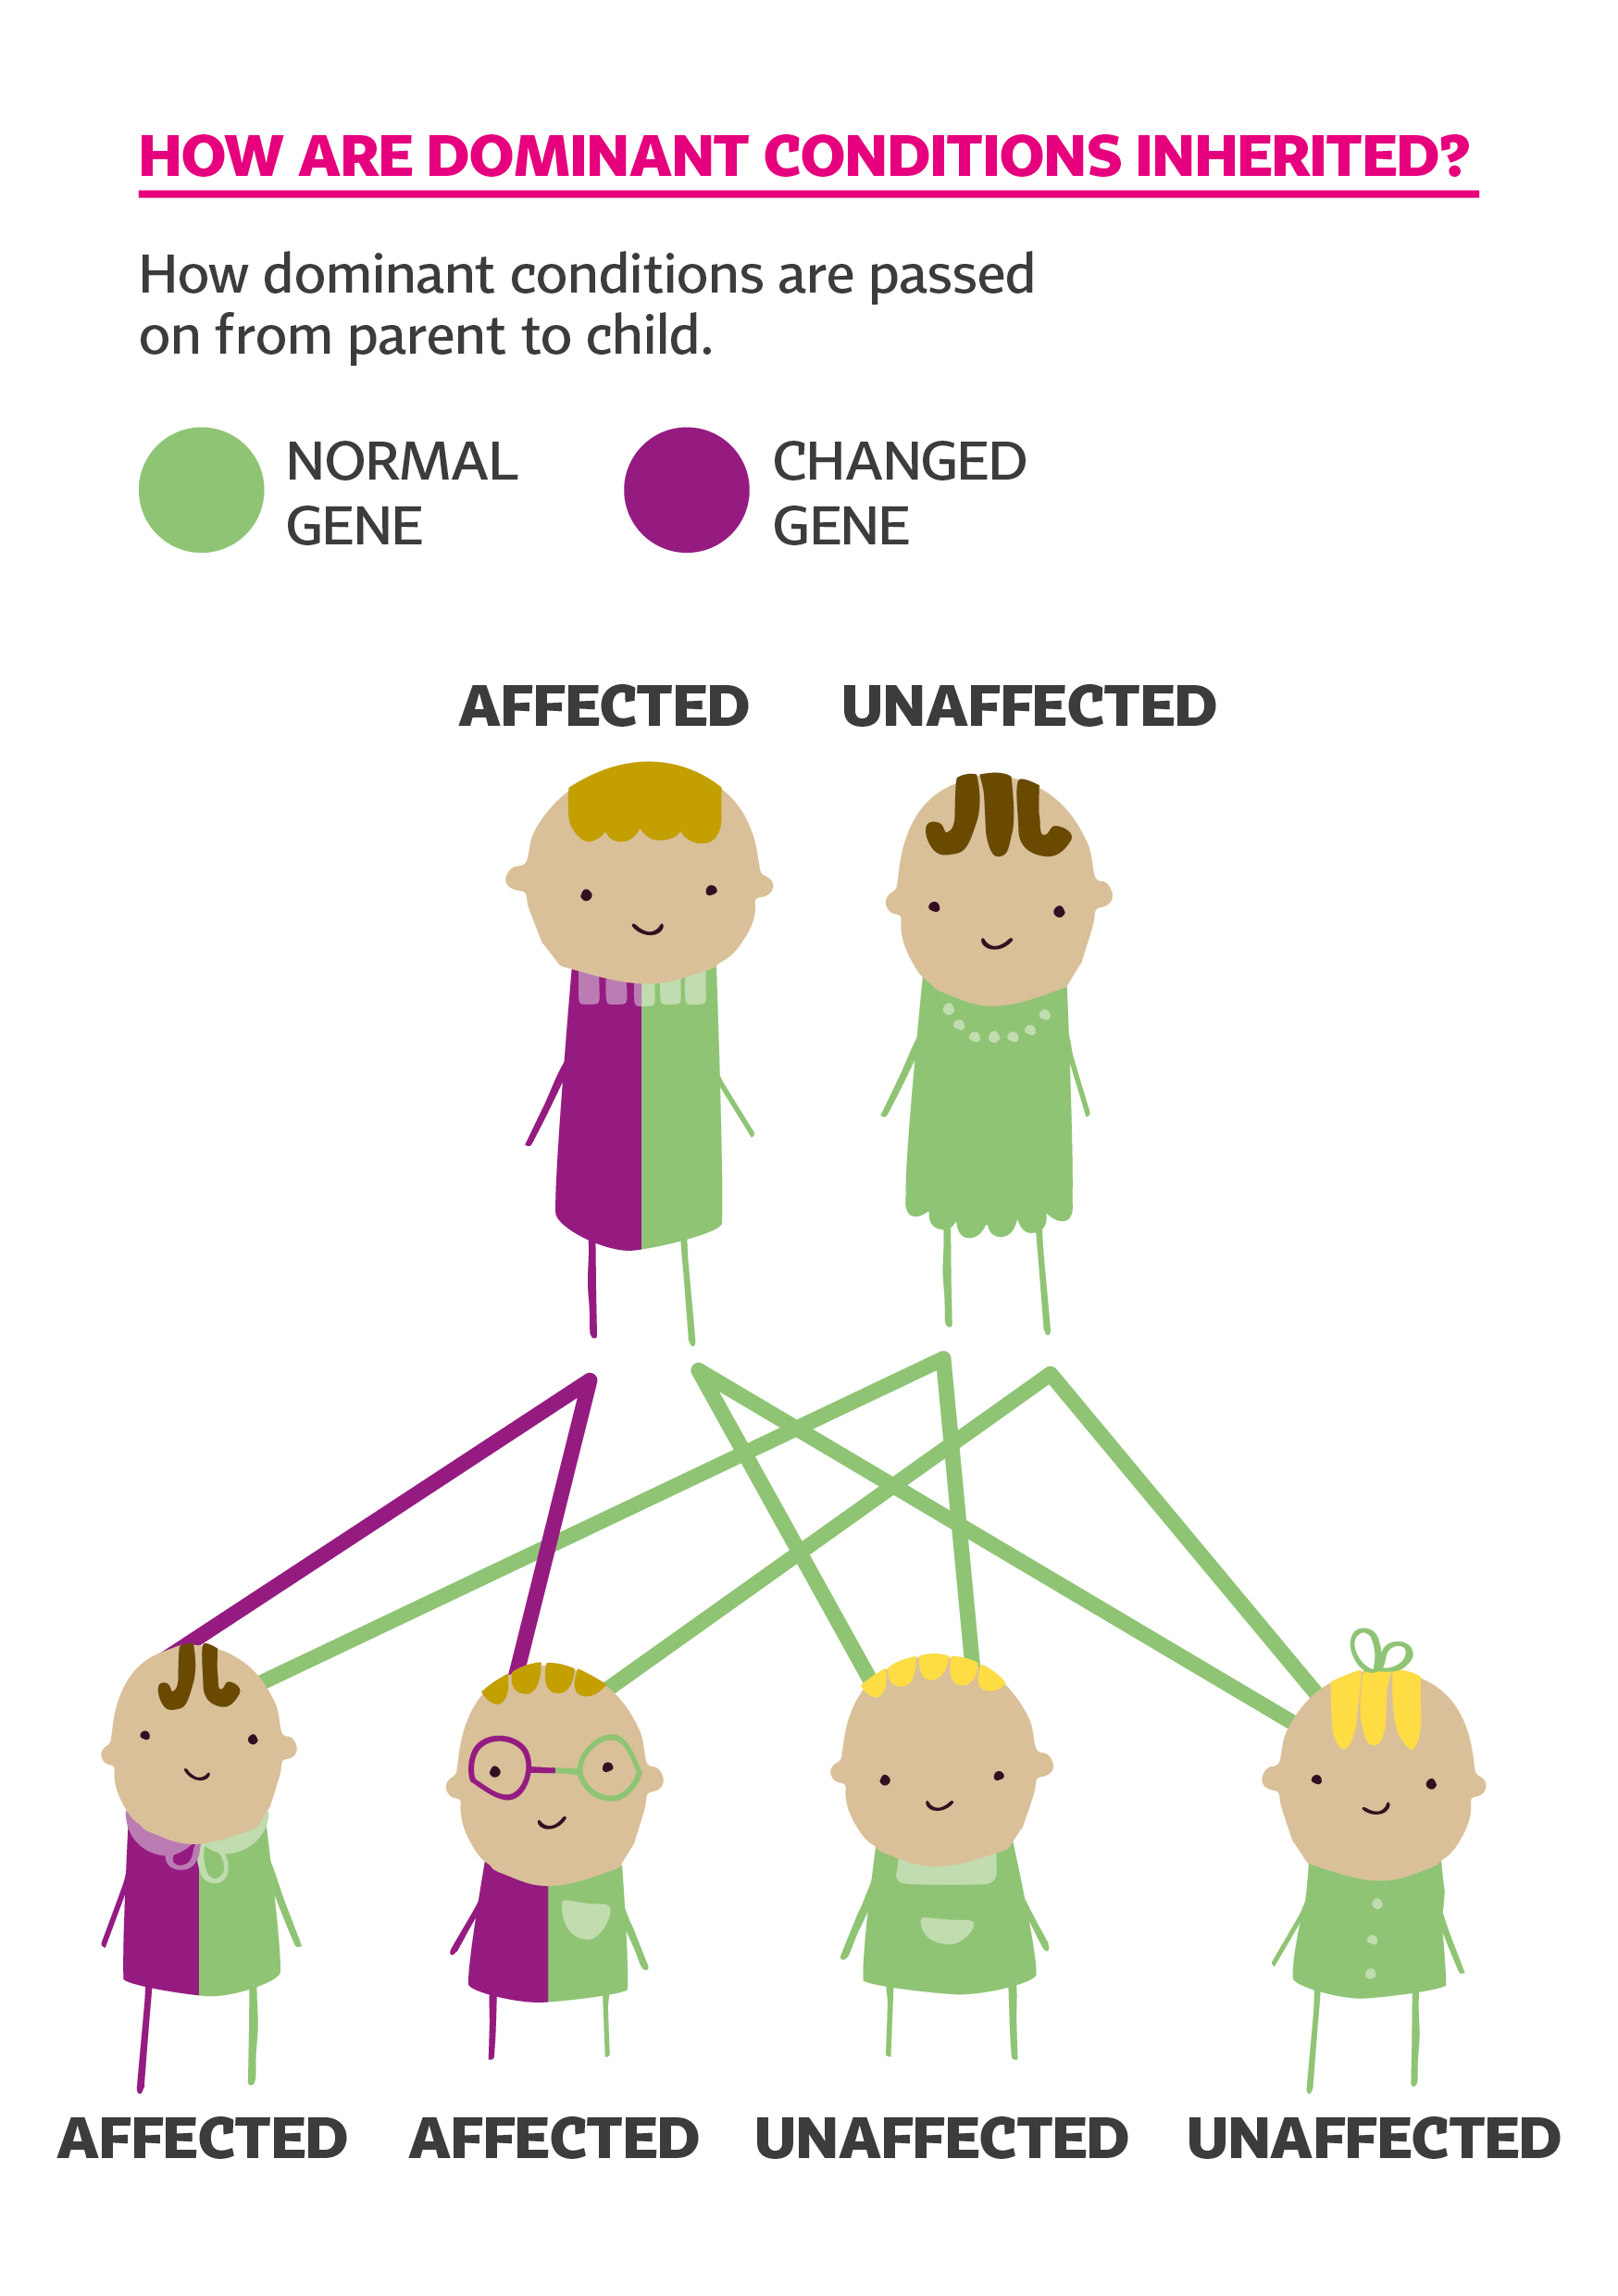 Diagram to show how dominant conditions are inherited